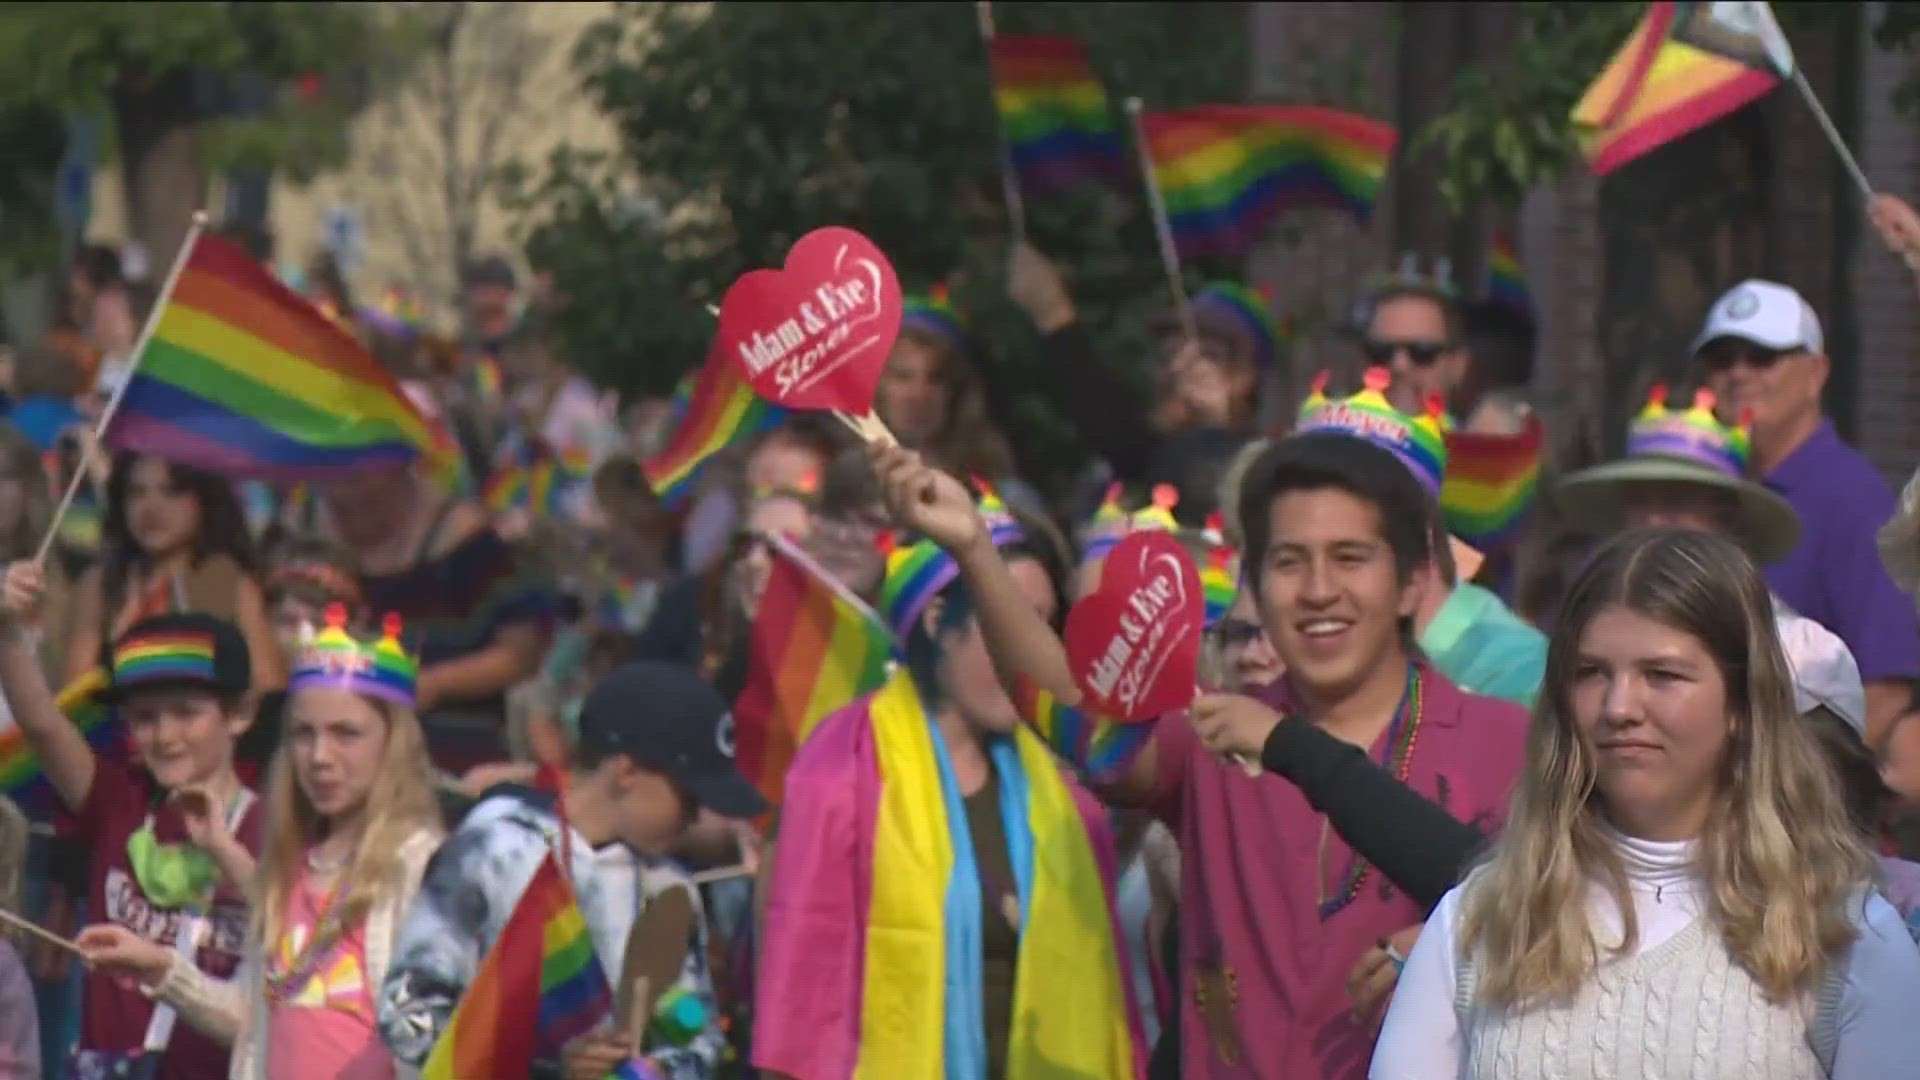 Boise Pride Executive Director Donald Williamson joins KTVB to explain how this year's festival is breaking records and what to expect at Cecil D. Andrus Park.